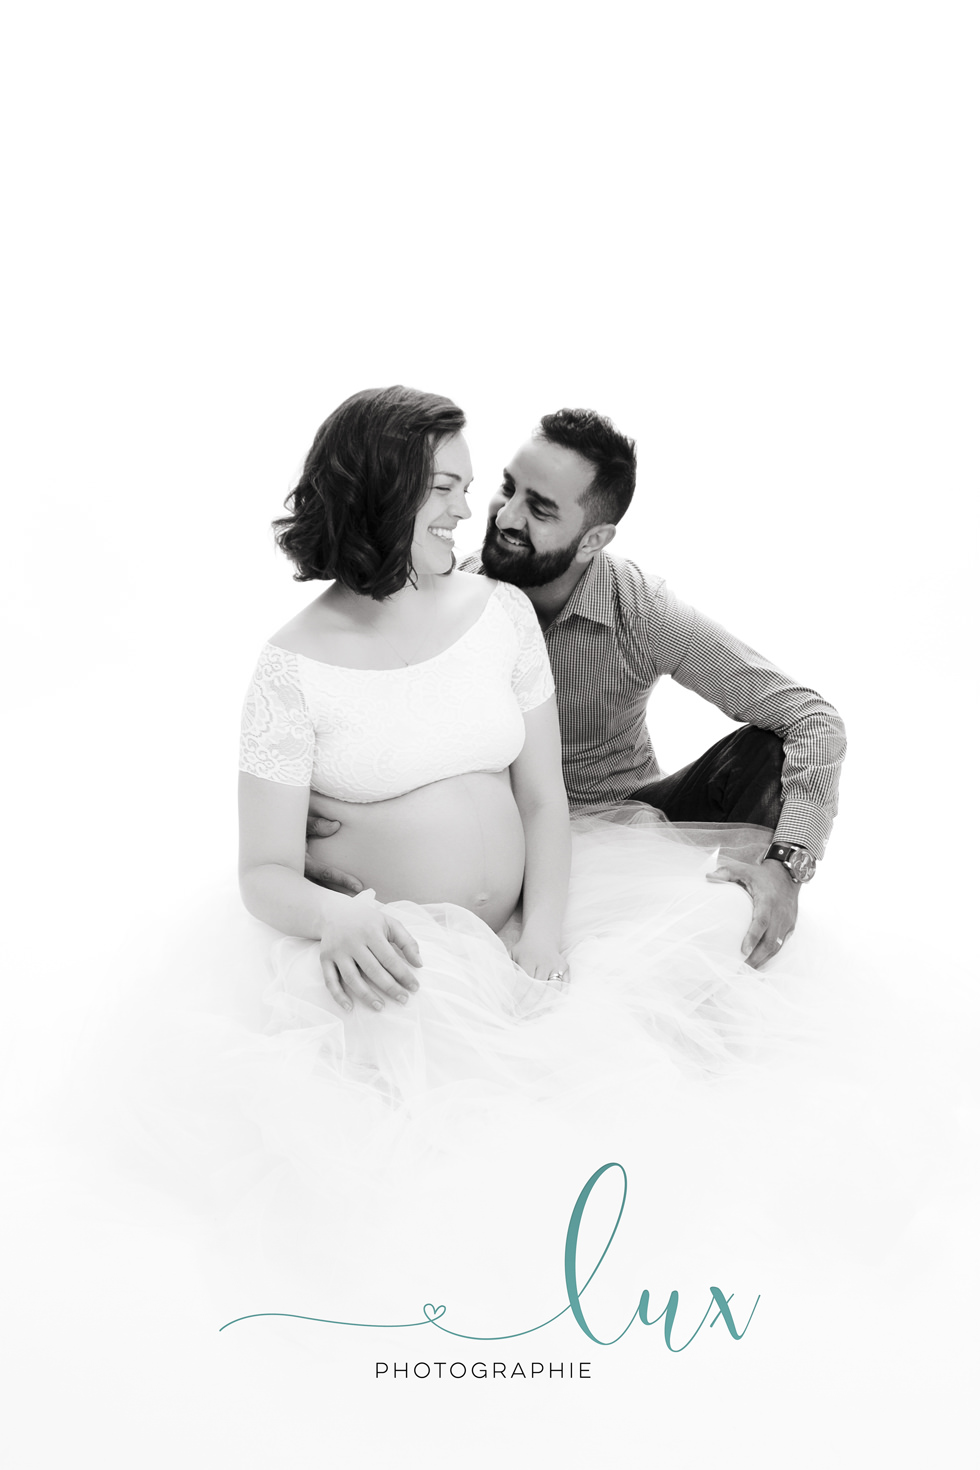 Pregnancy Photography Montreal. Pregnant woman in tutu sitting with husband on the floor.